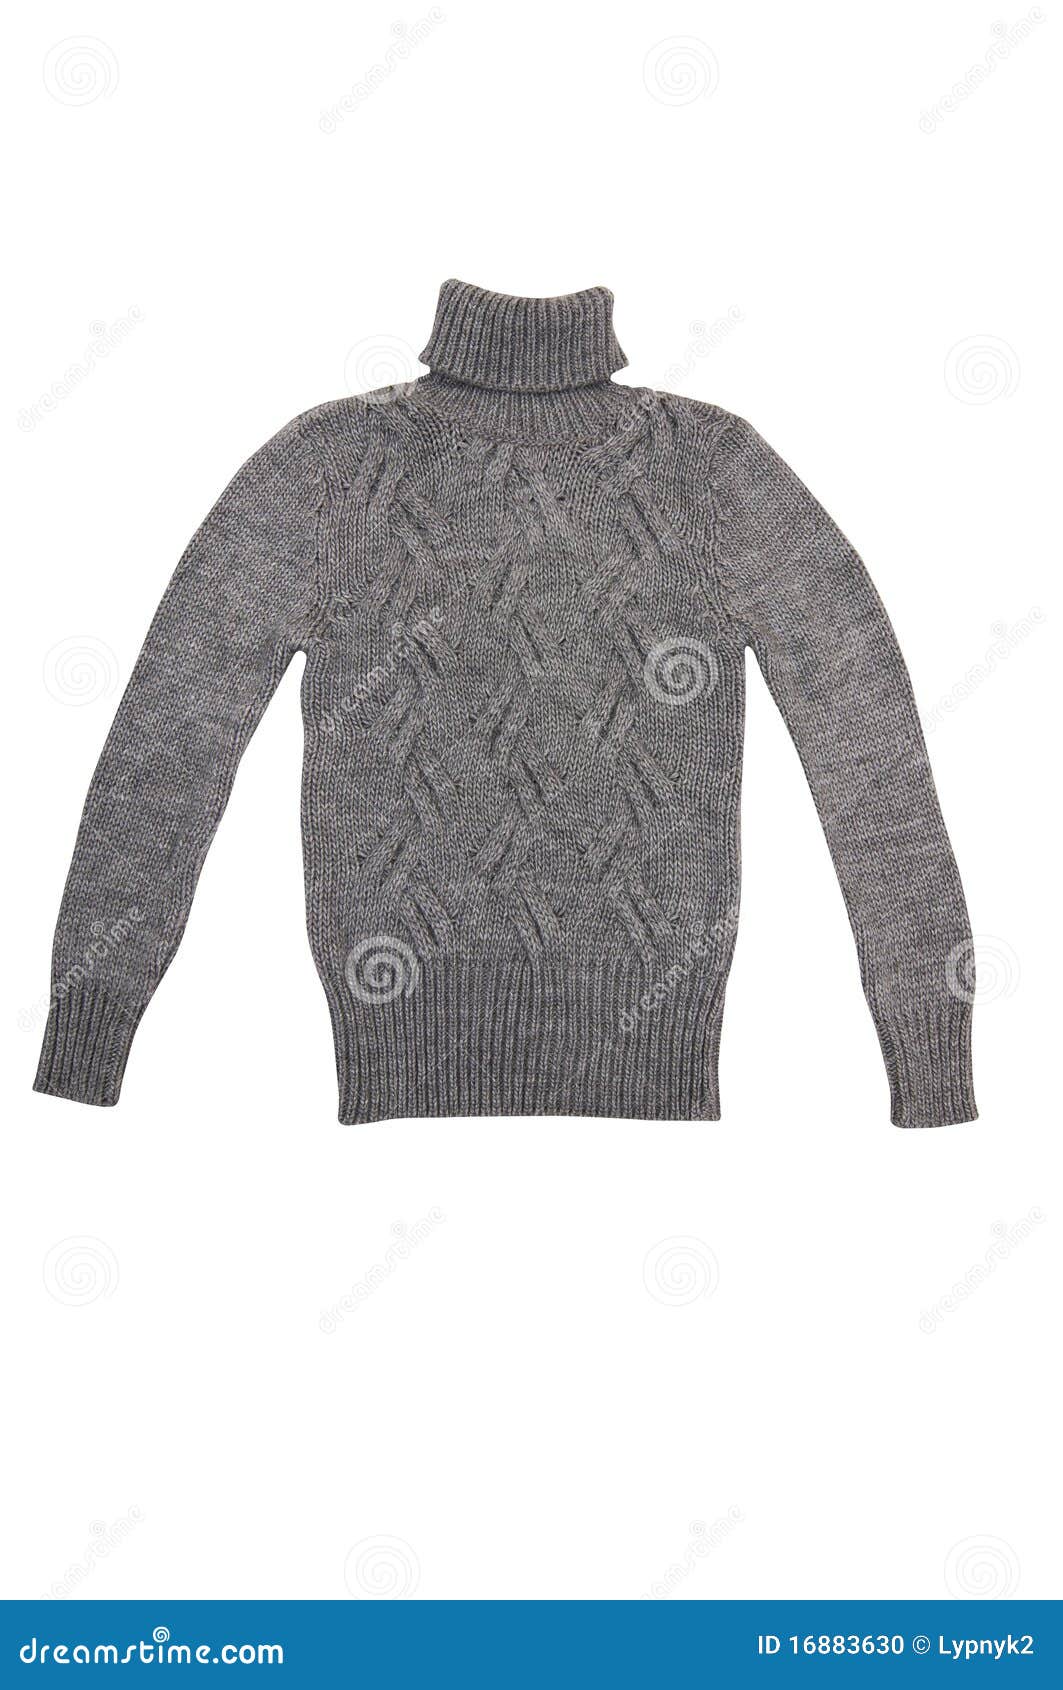 Grey sweater on a white. stock photo. Image of chic, dress - 16883630